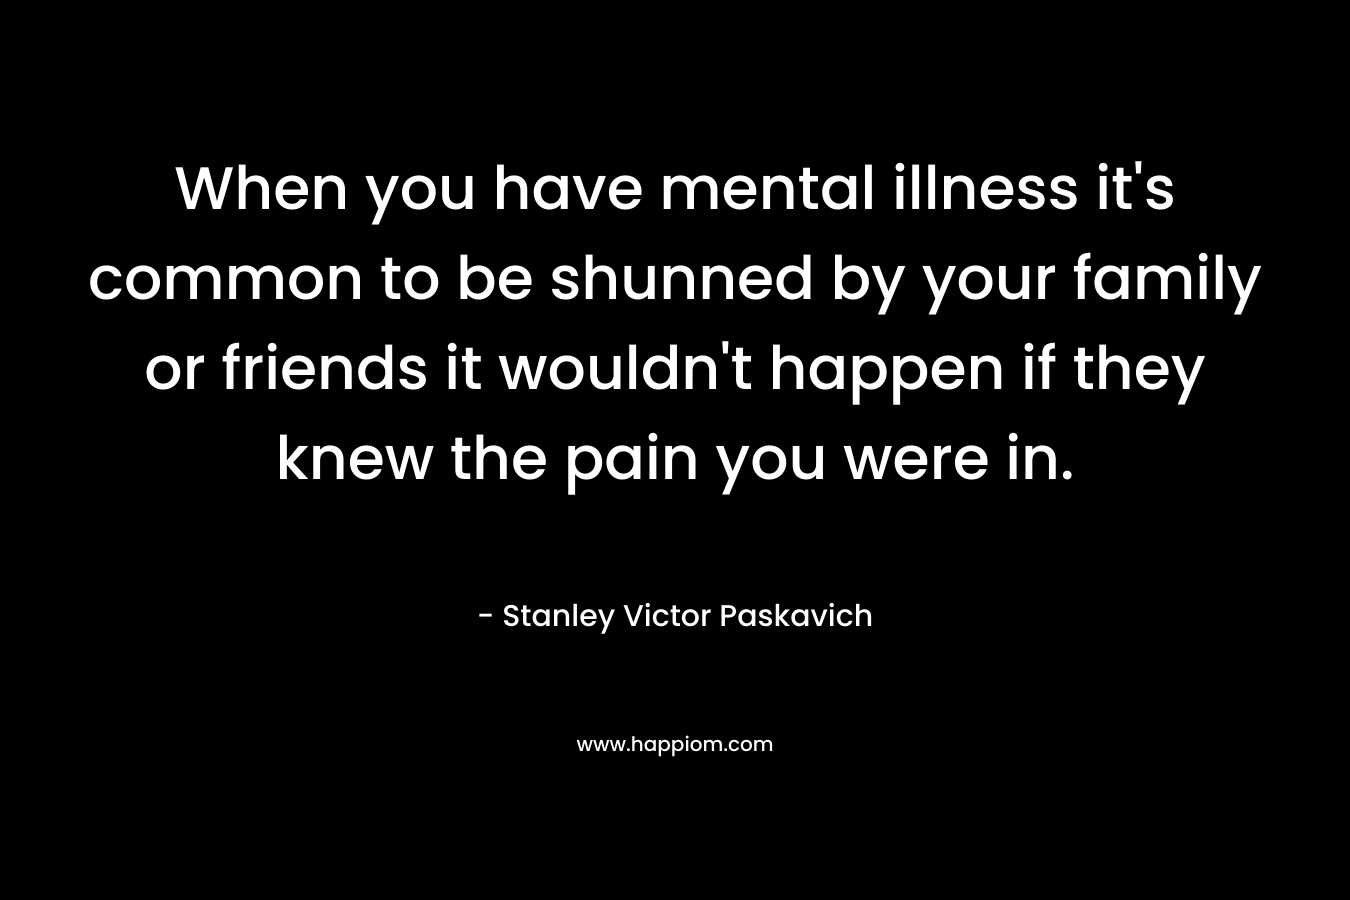 When you have mental illness it’s common to be shunned by your family or friends it wouldn’t happen if they knew the pain you were in. – Stanley Victor Paskavich